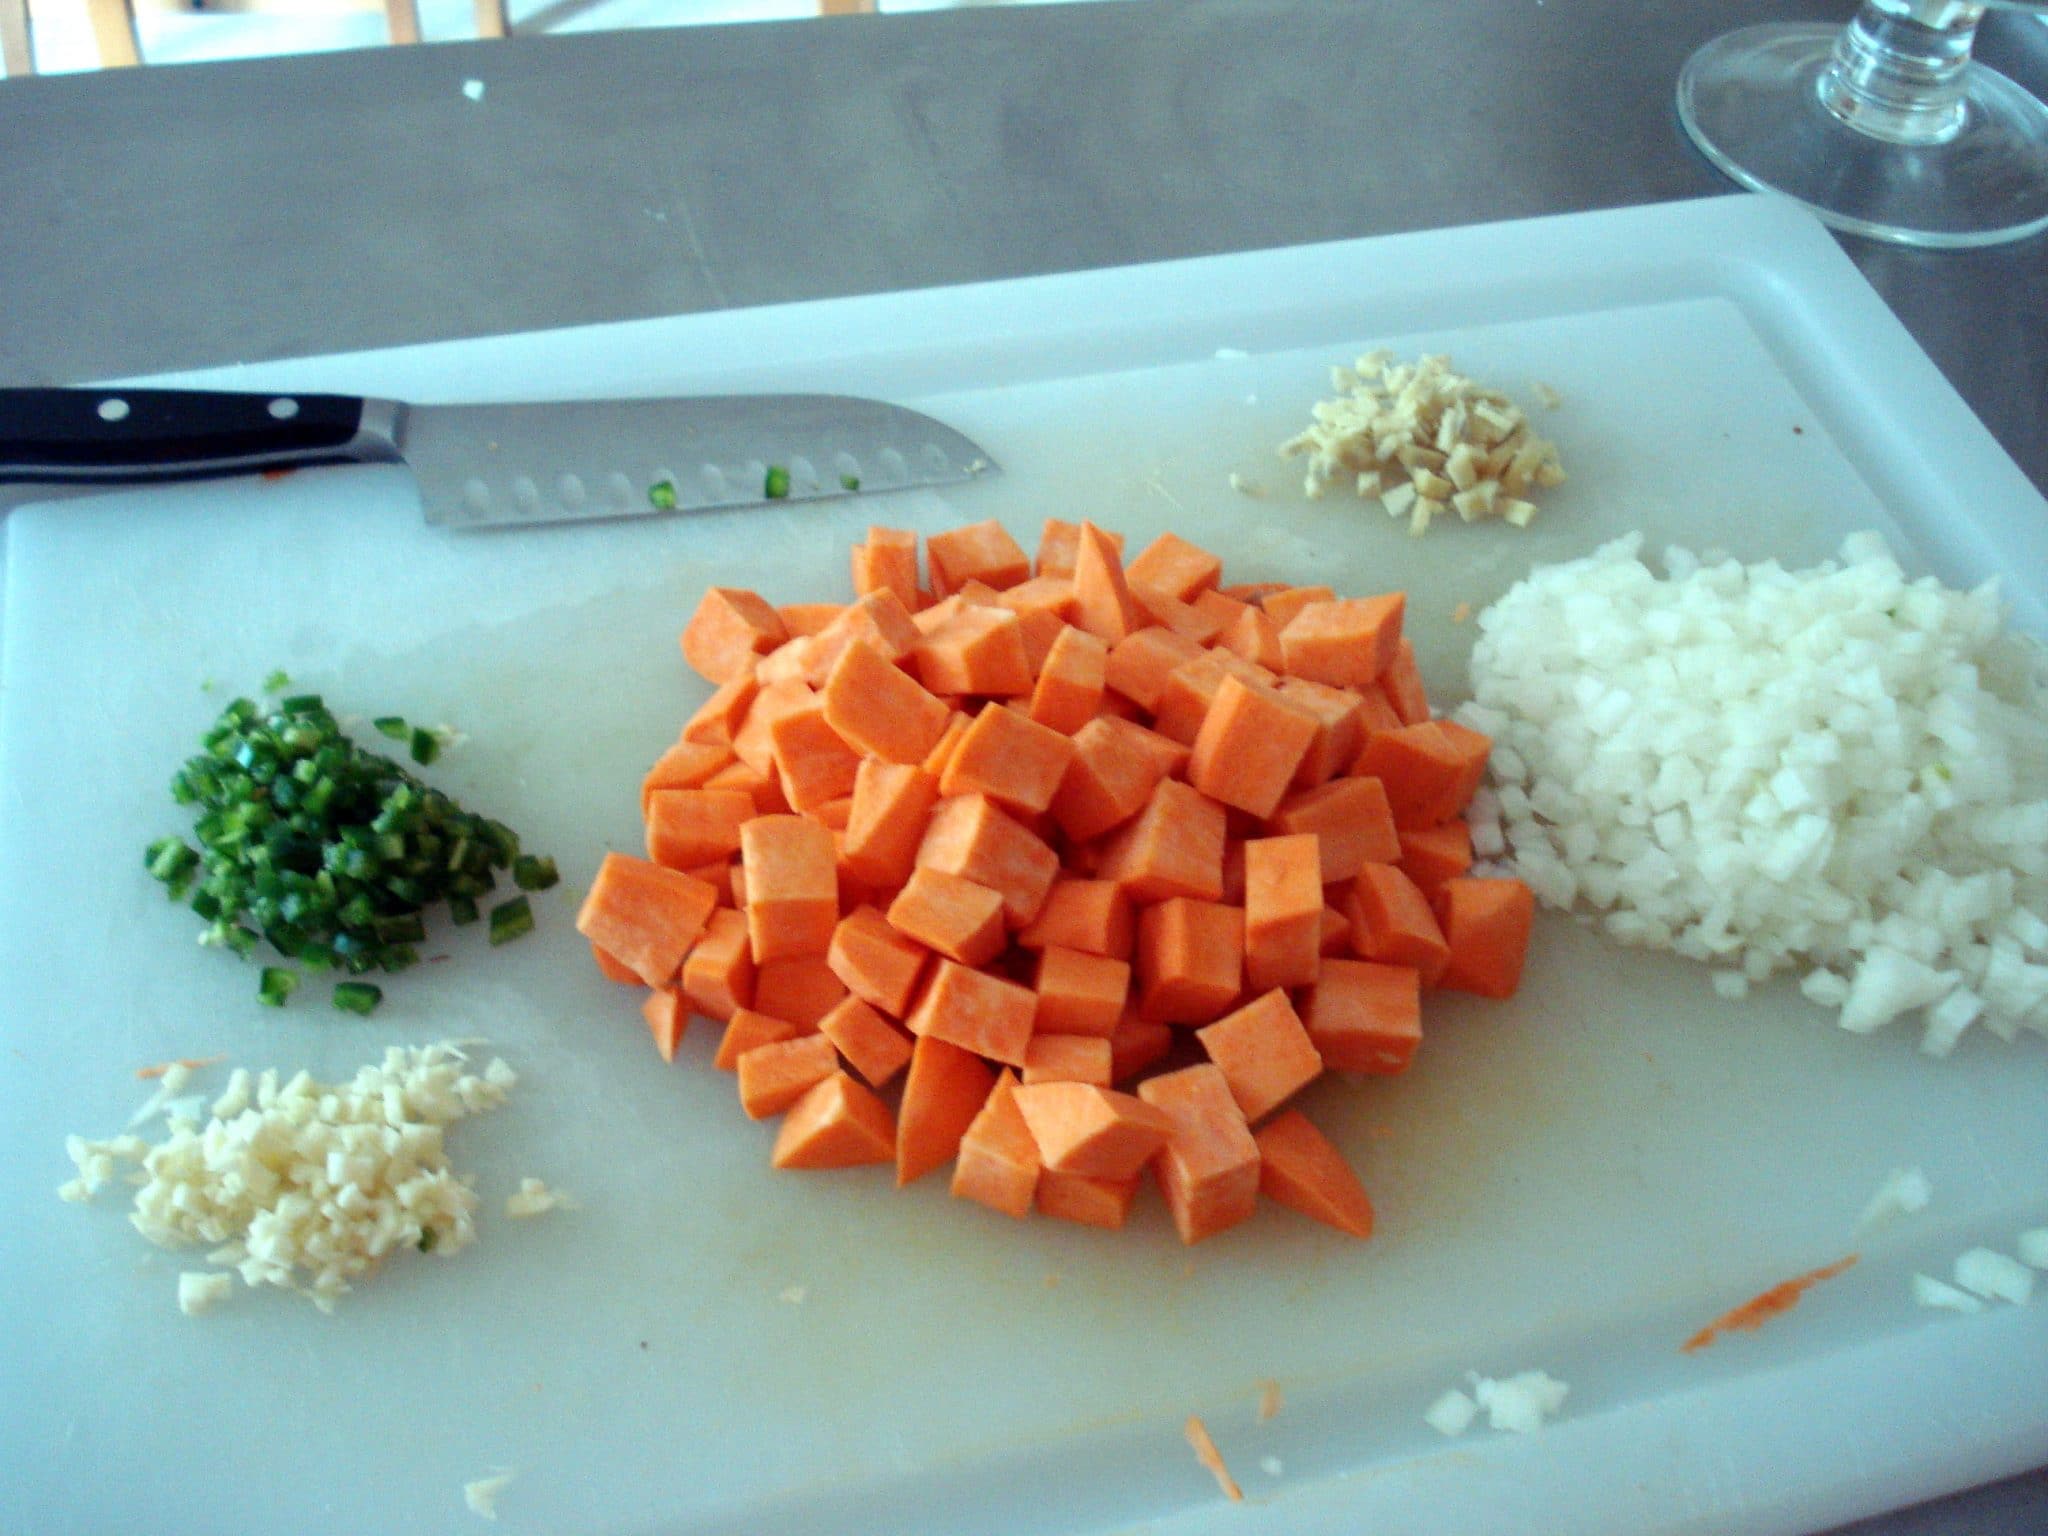 Chopped Ingredients to prepare Sweet Potato and Chickpea Curry with Green Peas